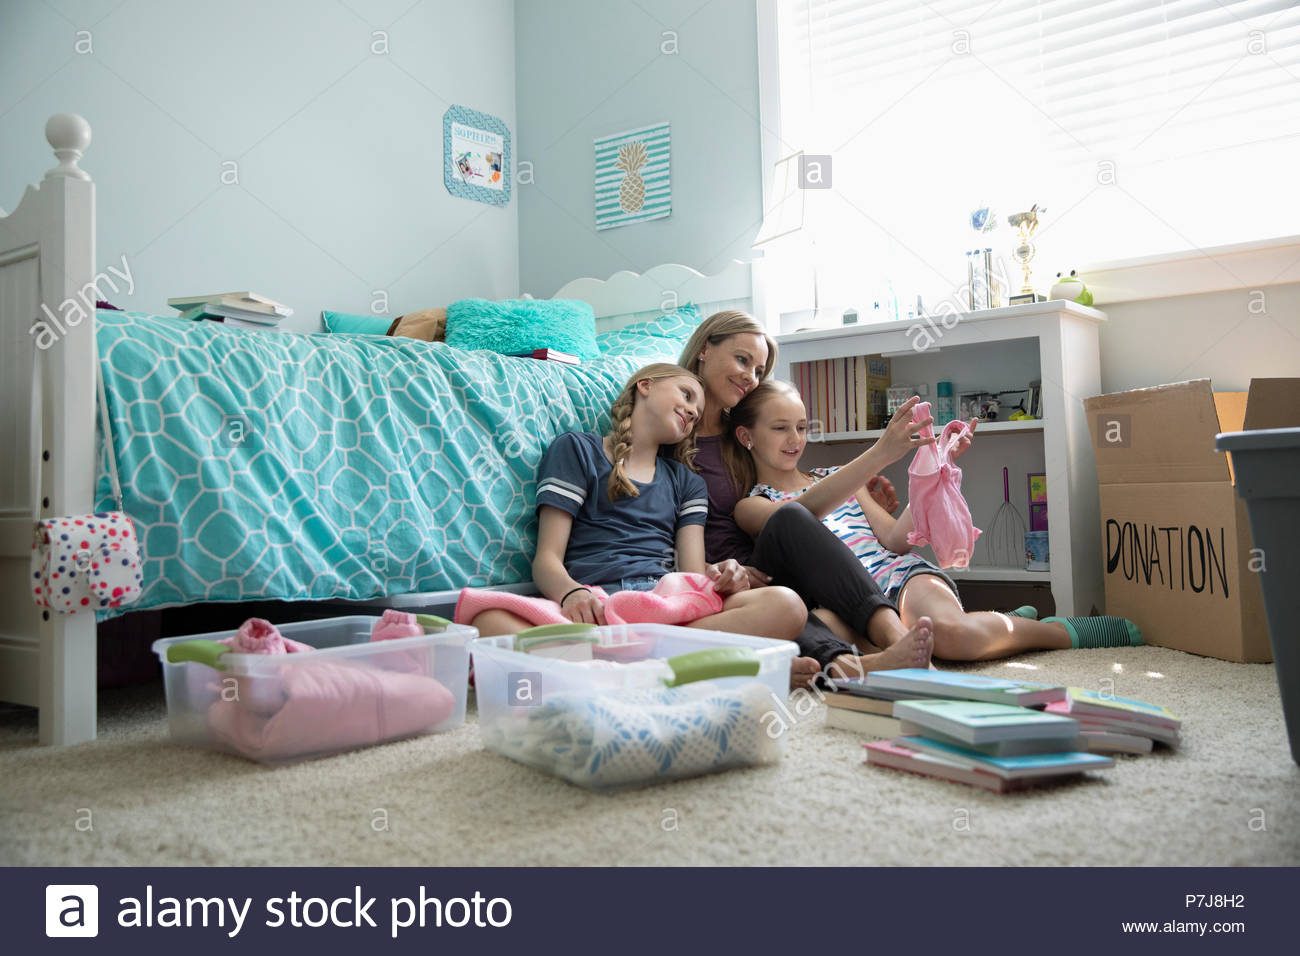 Mother and daughters donating baby clothes in bedroom Stock Photo